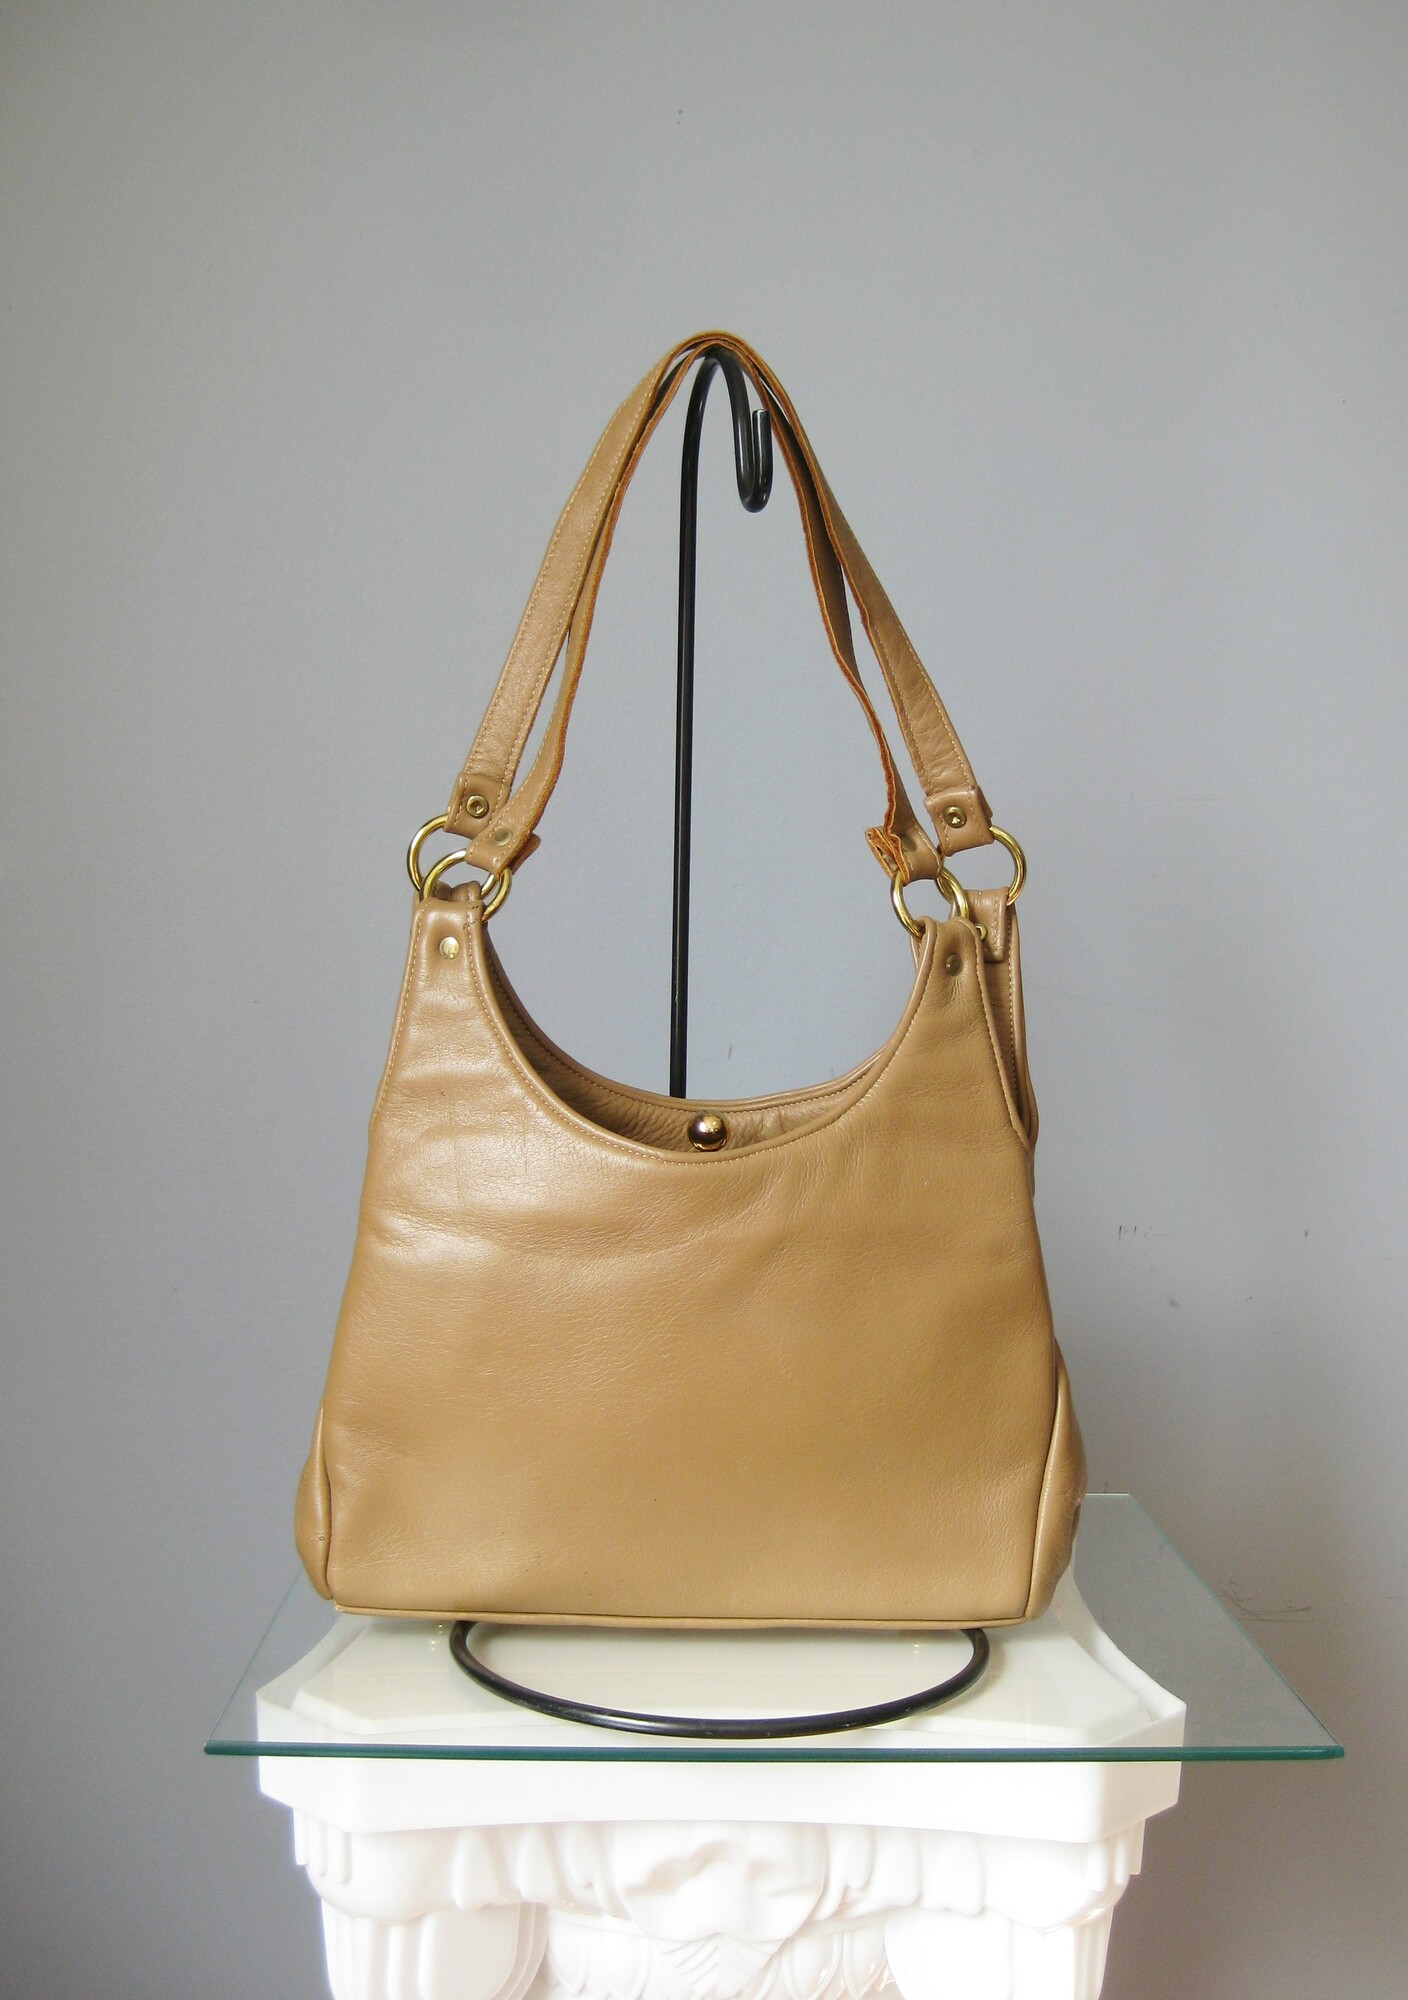 This Tan shoulder bag is made by from Deerskin.  It's a super soft leather frequently used to make gloves because it is so supple.  This bag is from the 1970s.  It has two handles and a tilt clasp main compartment. The floral lining is SOOO cute.  On either side of the main compartement there is room to slip in things that you want to be able to grab quickly.

Very good condition, two of the corners have a bit of wear as shown.

It measures:

10.25 x 7 x 3  Handle drop 11

Thanks for looking!
#42146